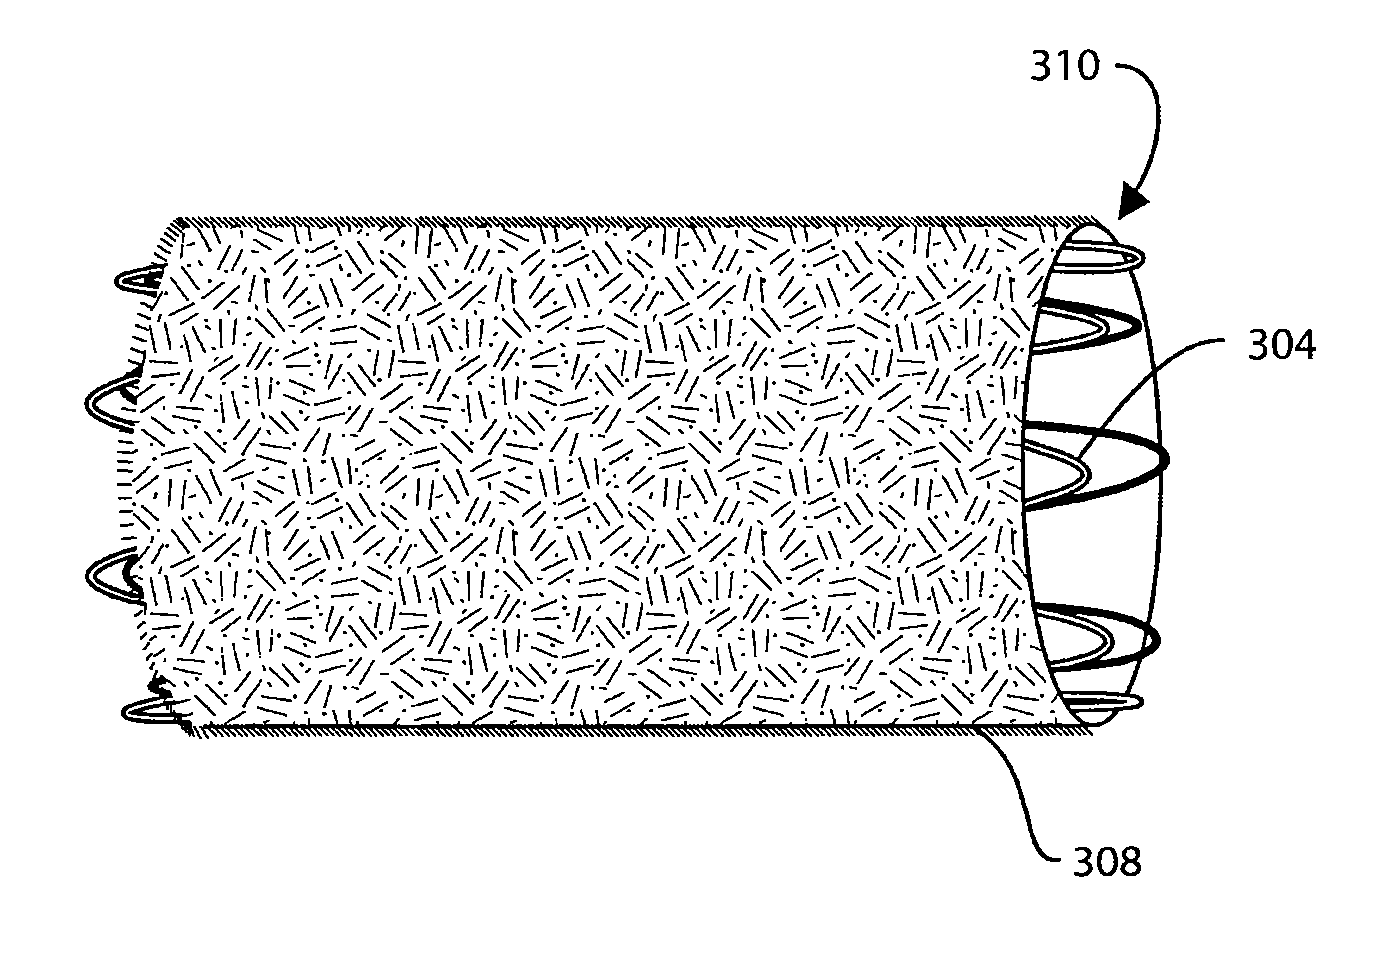 Catheter Delivered Valve Having a Barrier to Provide an Enhanced Seal